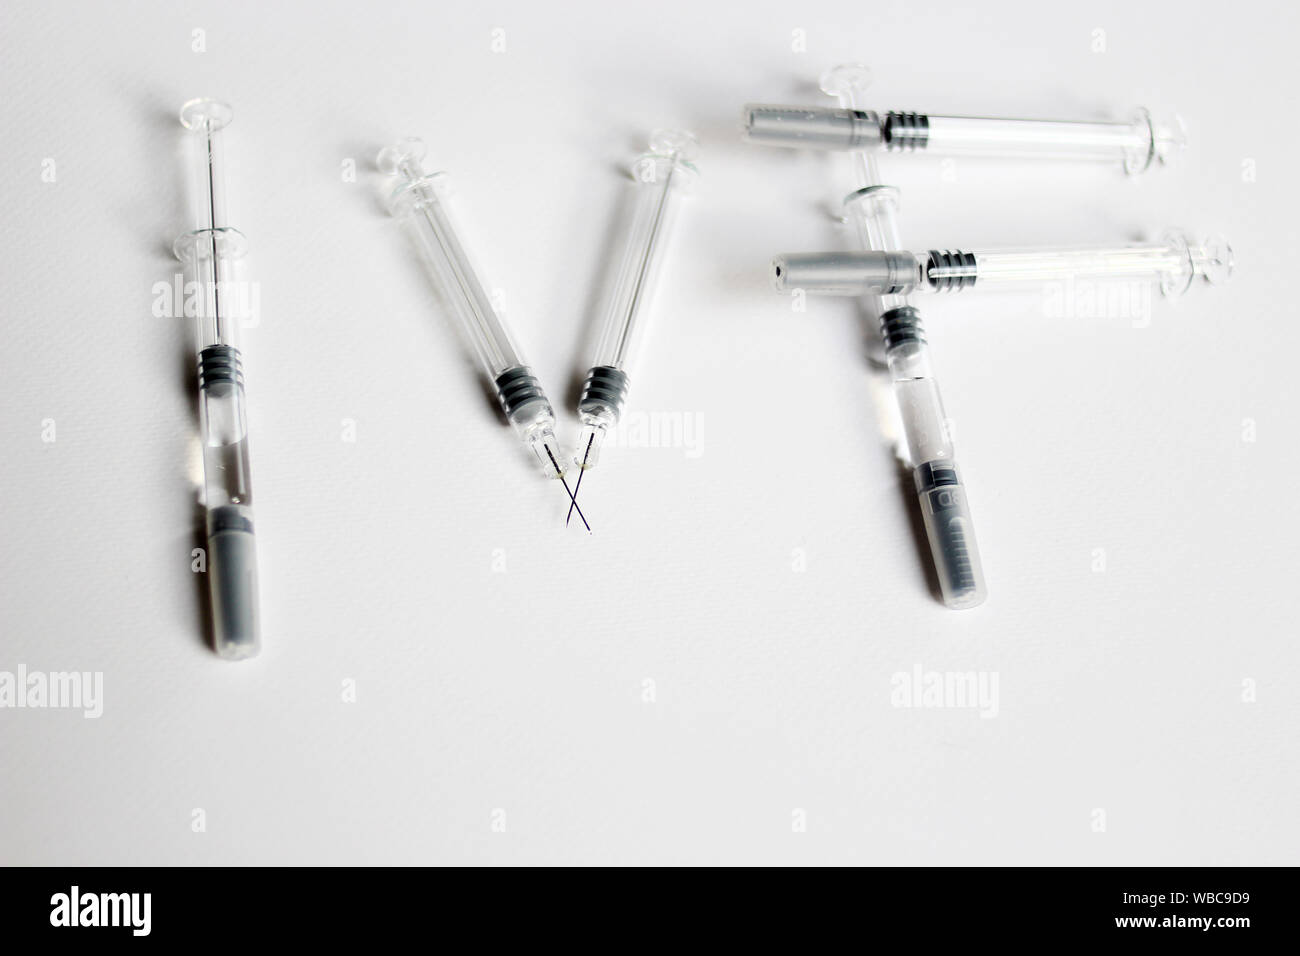 In Vitro Fertilization injection pen. IVF treatment drugs, syringes, needles and pills.  IVF spelled with syringes Stock Photo